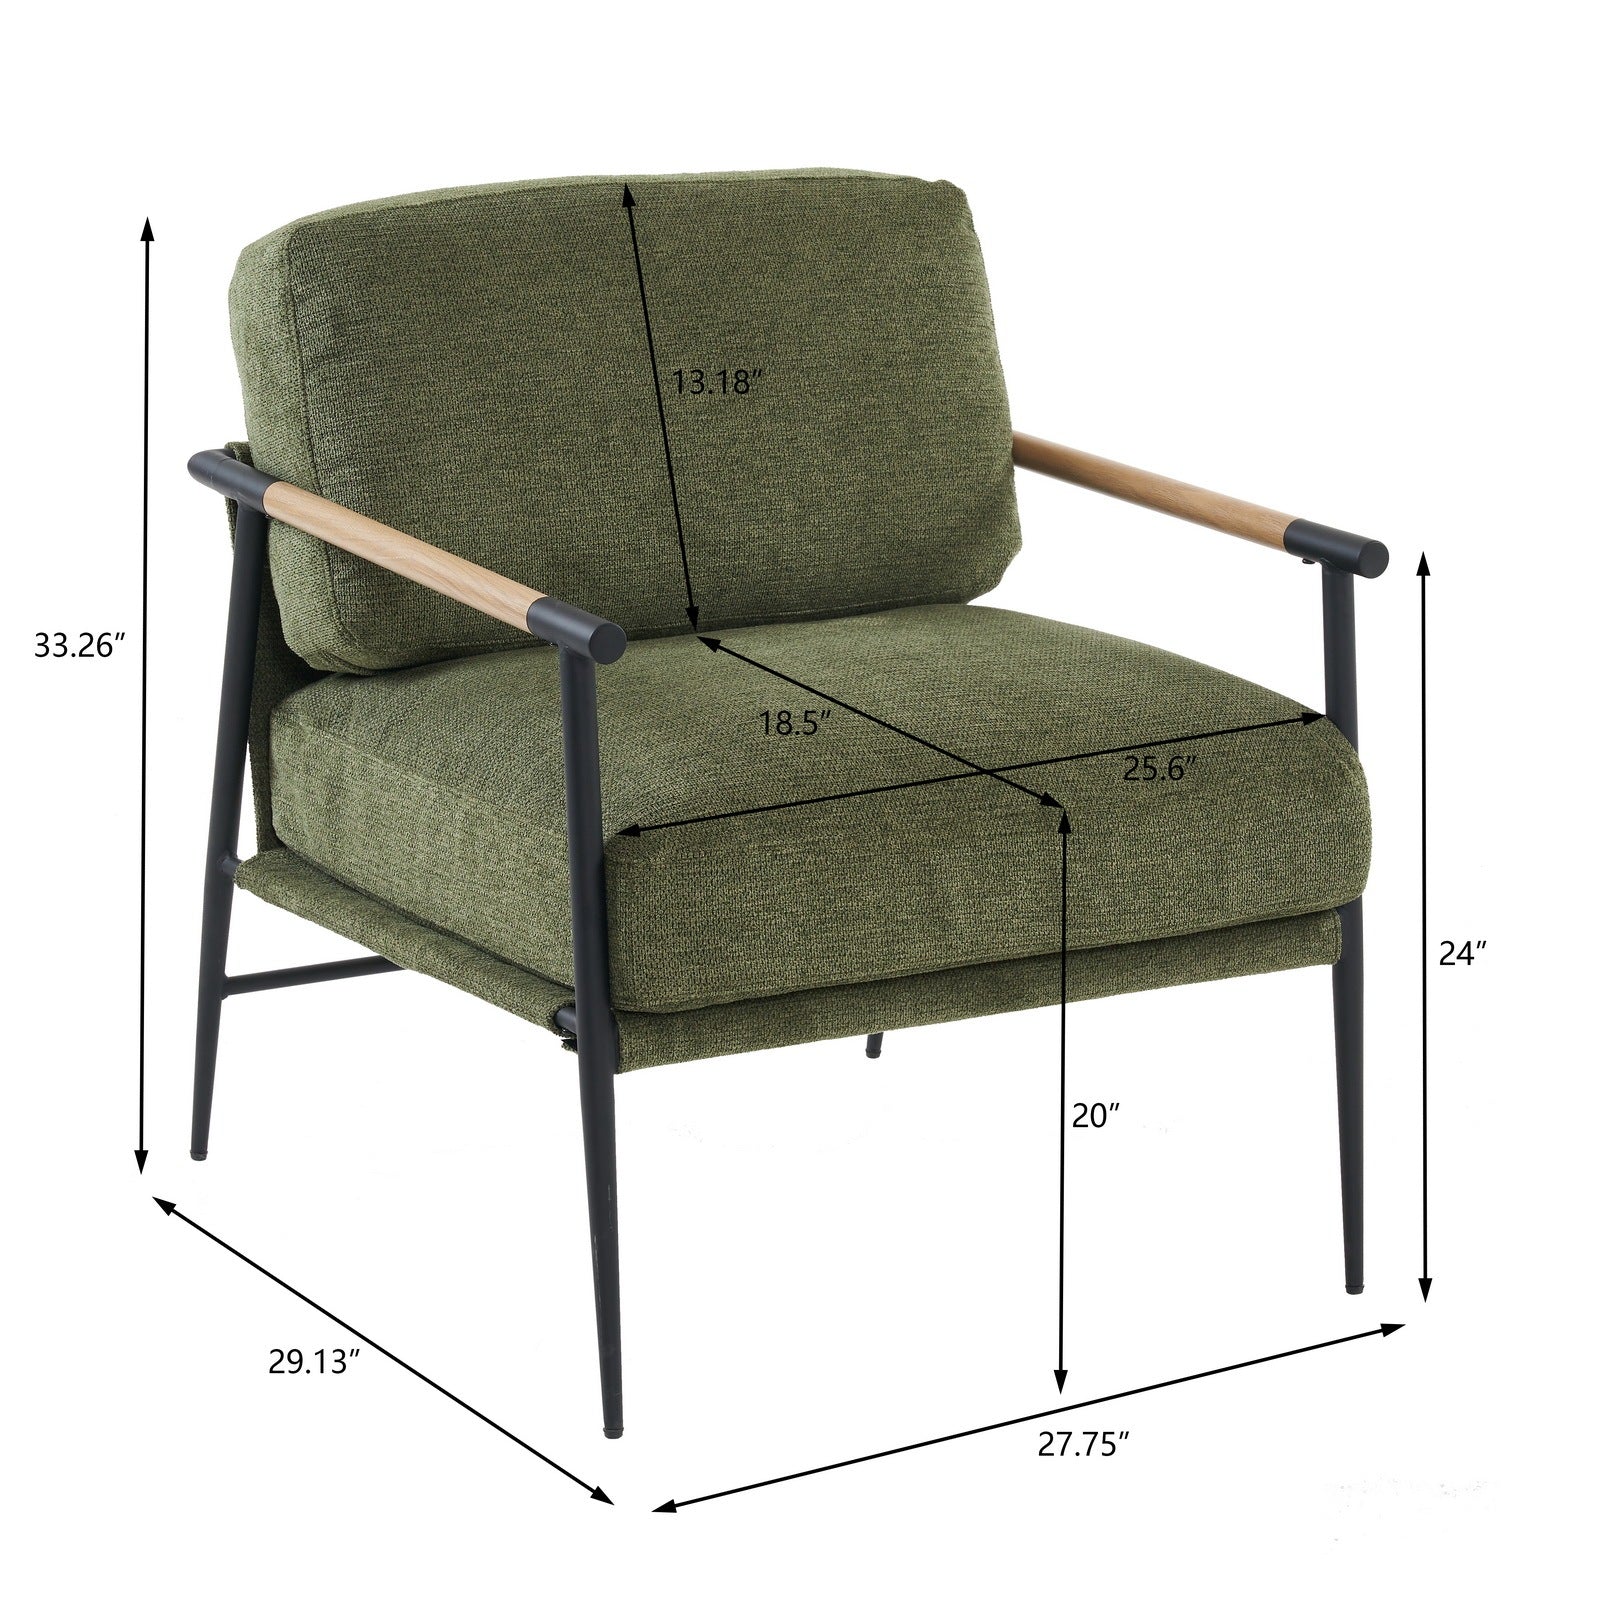 Leisure chair lounge chair Green color green-fabric